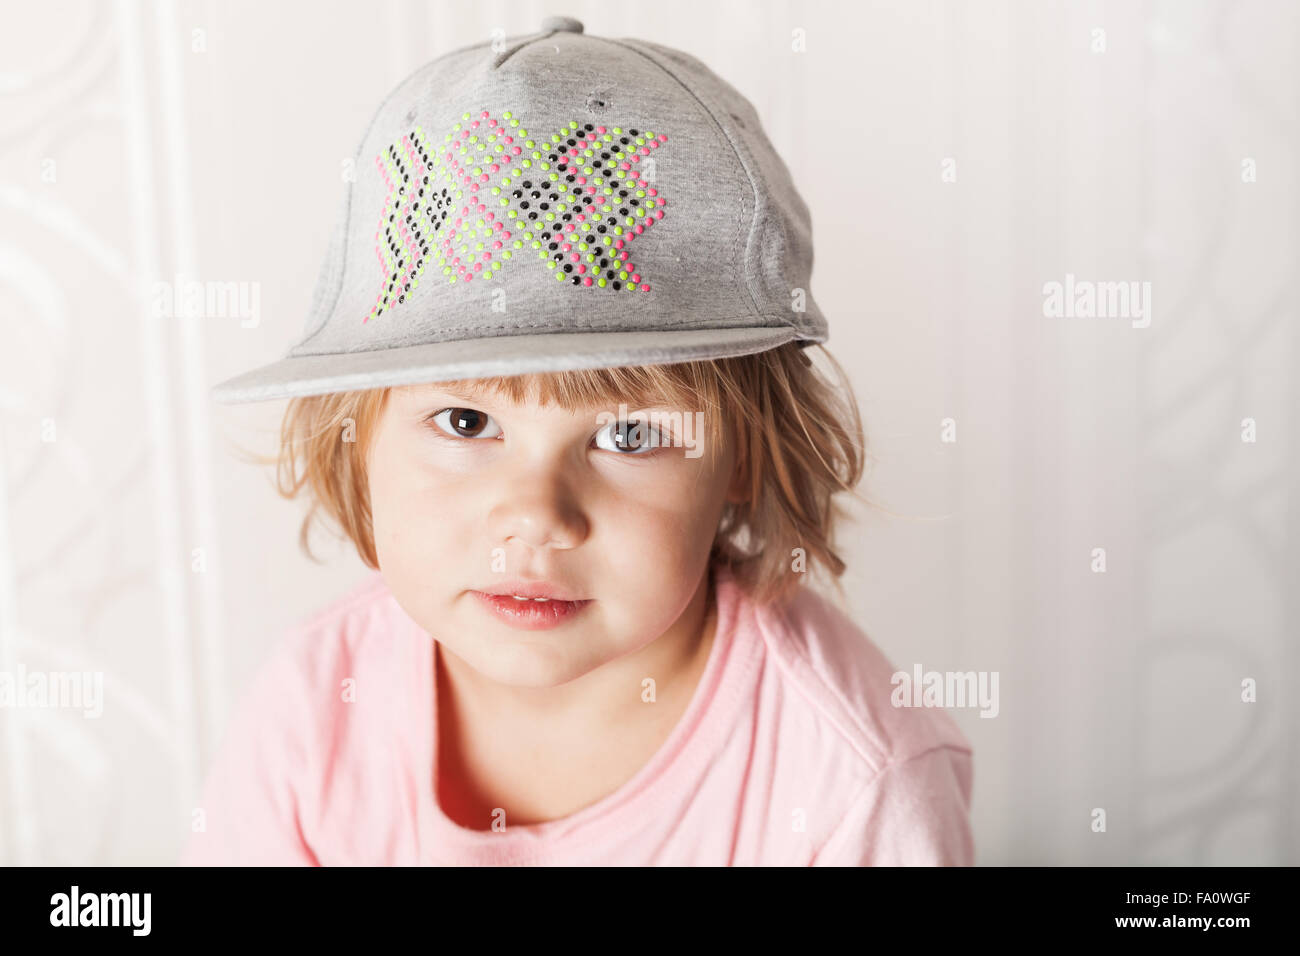 Closeup portrait of cute Caucasian blond baby girl in pink t-shirt and gray cap Stock Photo